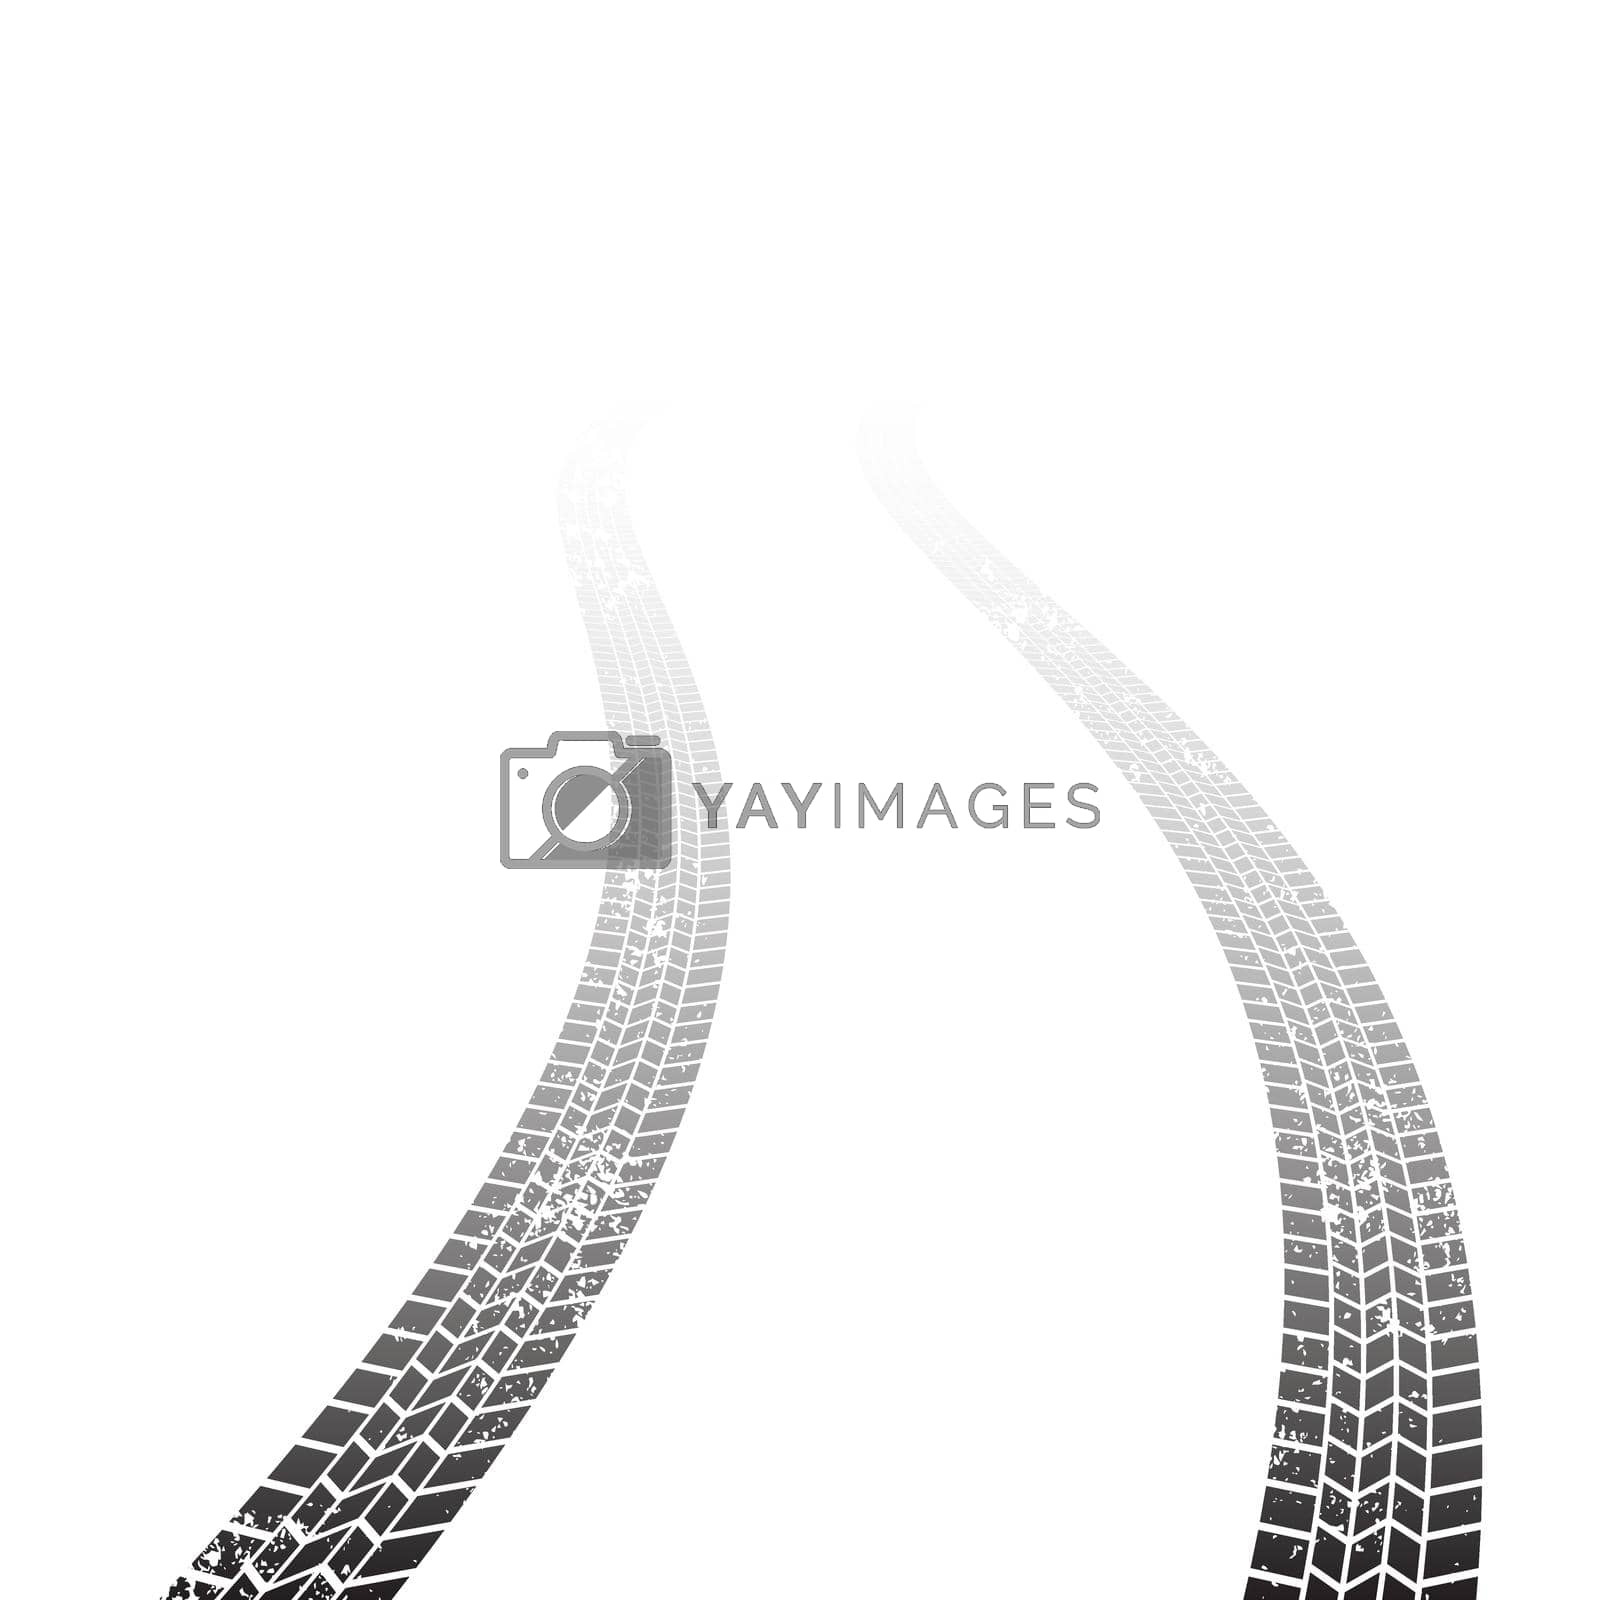 Royalty free image of Tire track background by misteremil